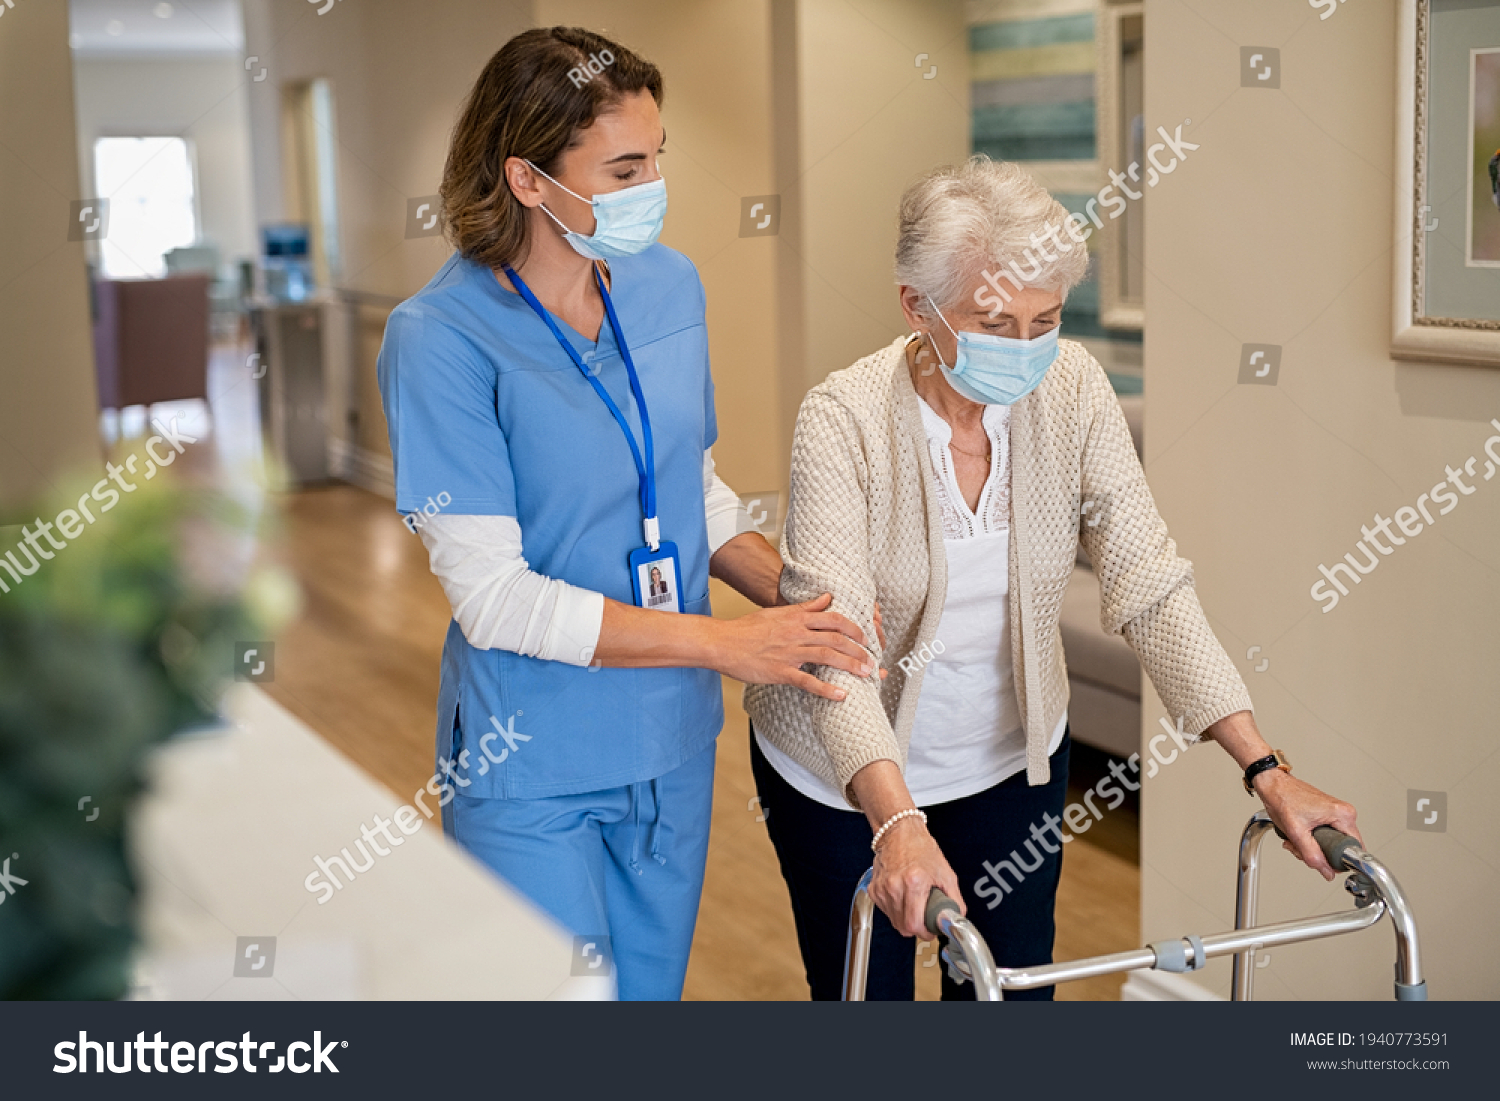 Smiling nurse with face mask helping senior woman to walk around the nursing home with walker. Young lovely nurse helping old woman with surgical mask for safety against covid-19 using a walking frame #1940773591